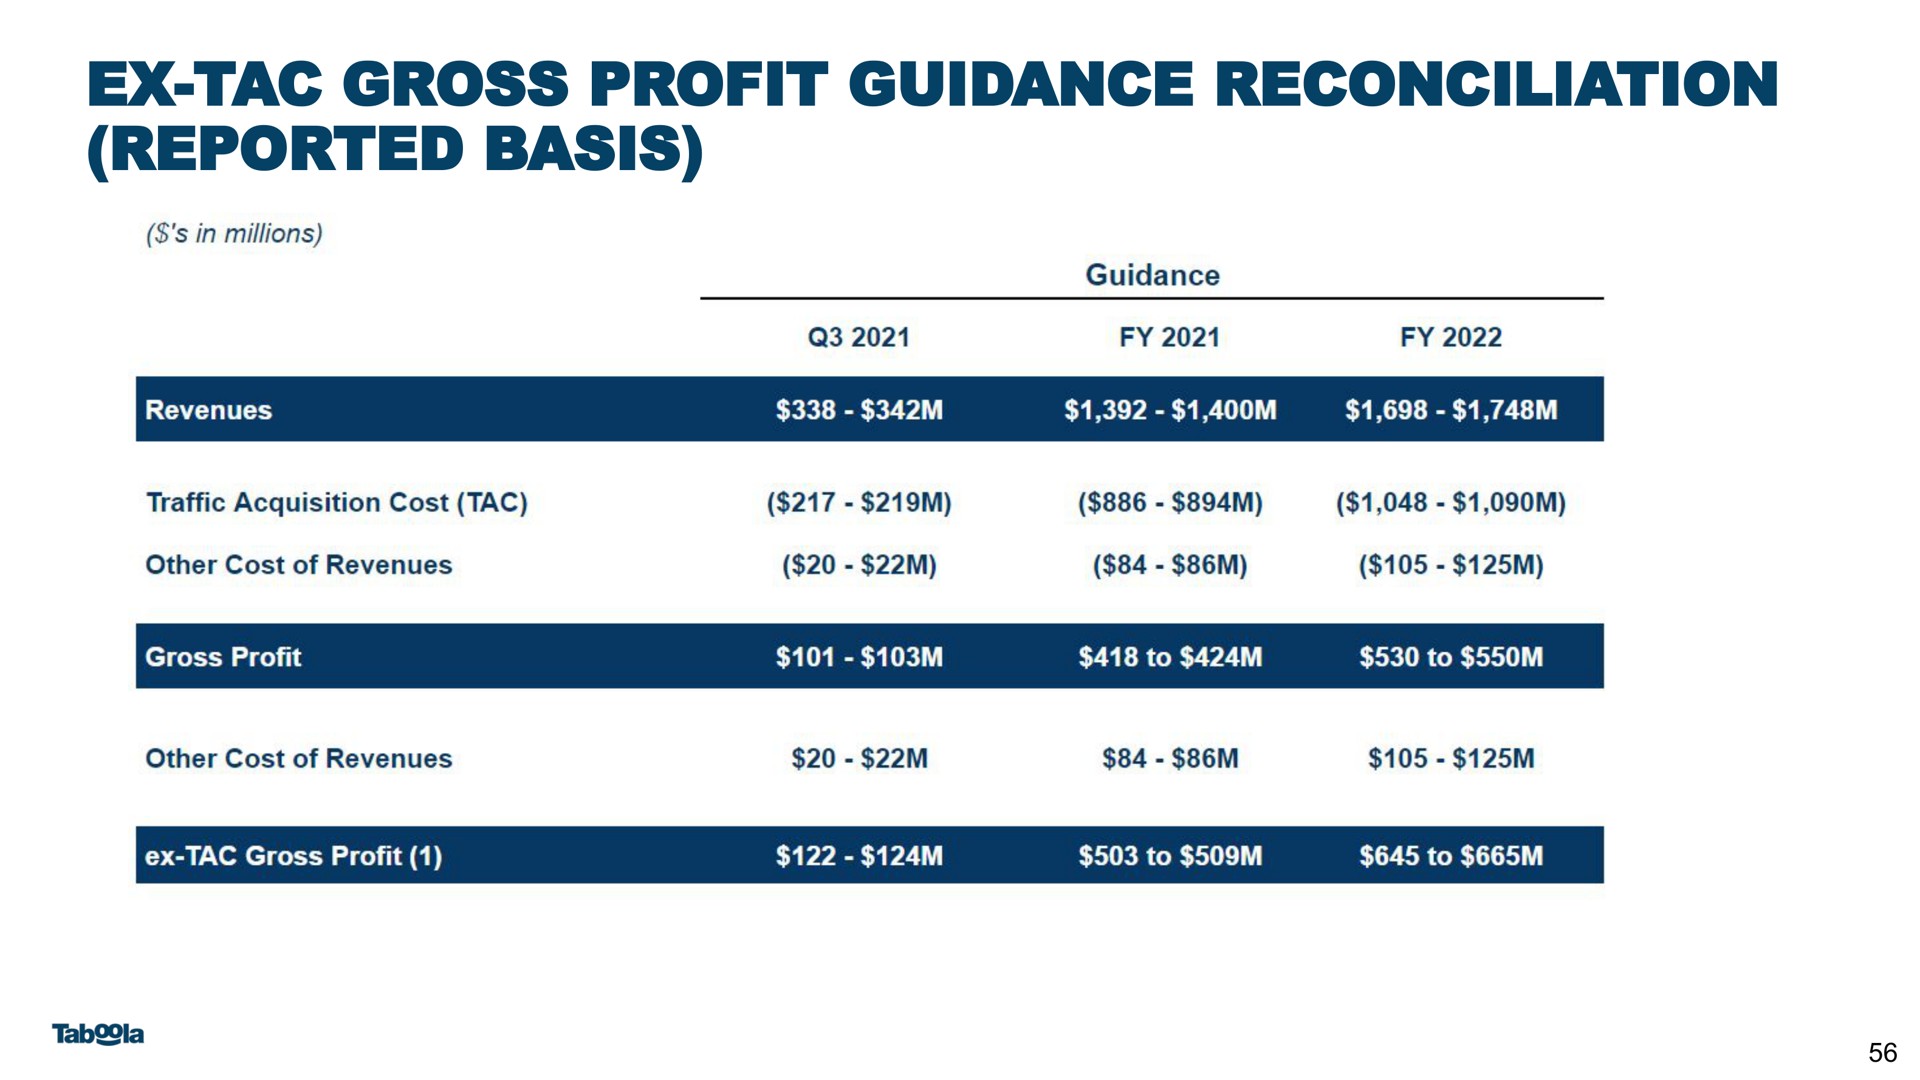 gross profit guidance reconciliation reported basis | Taboola